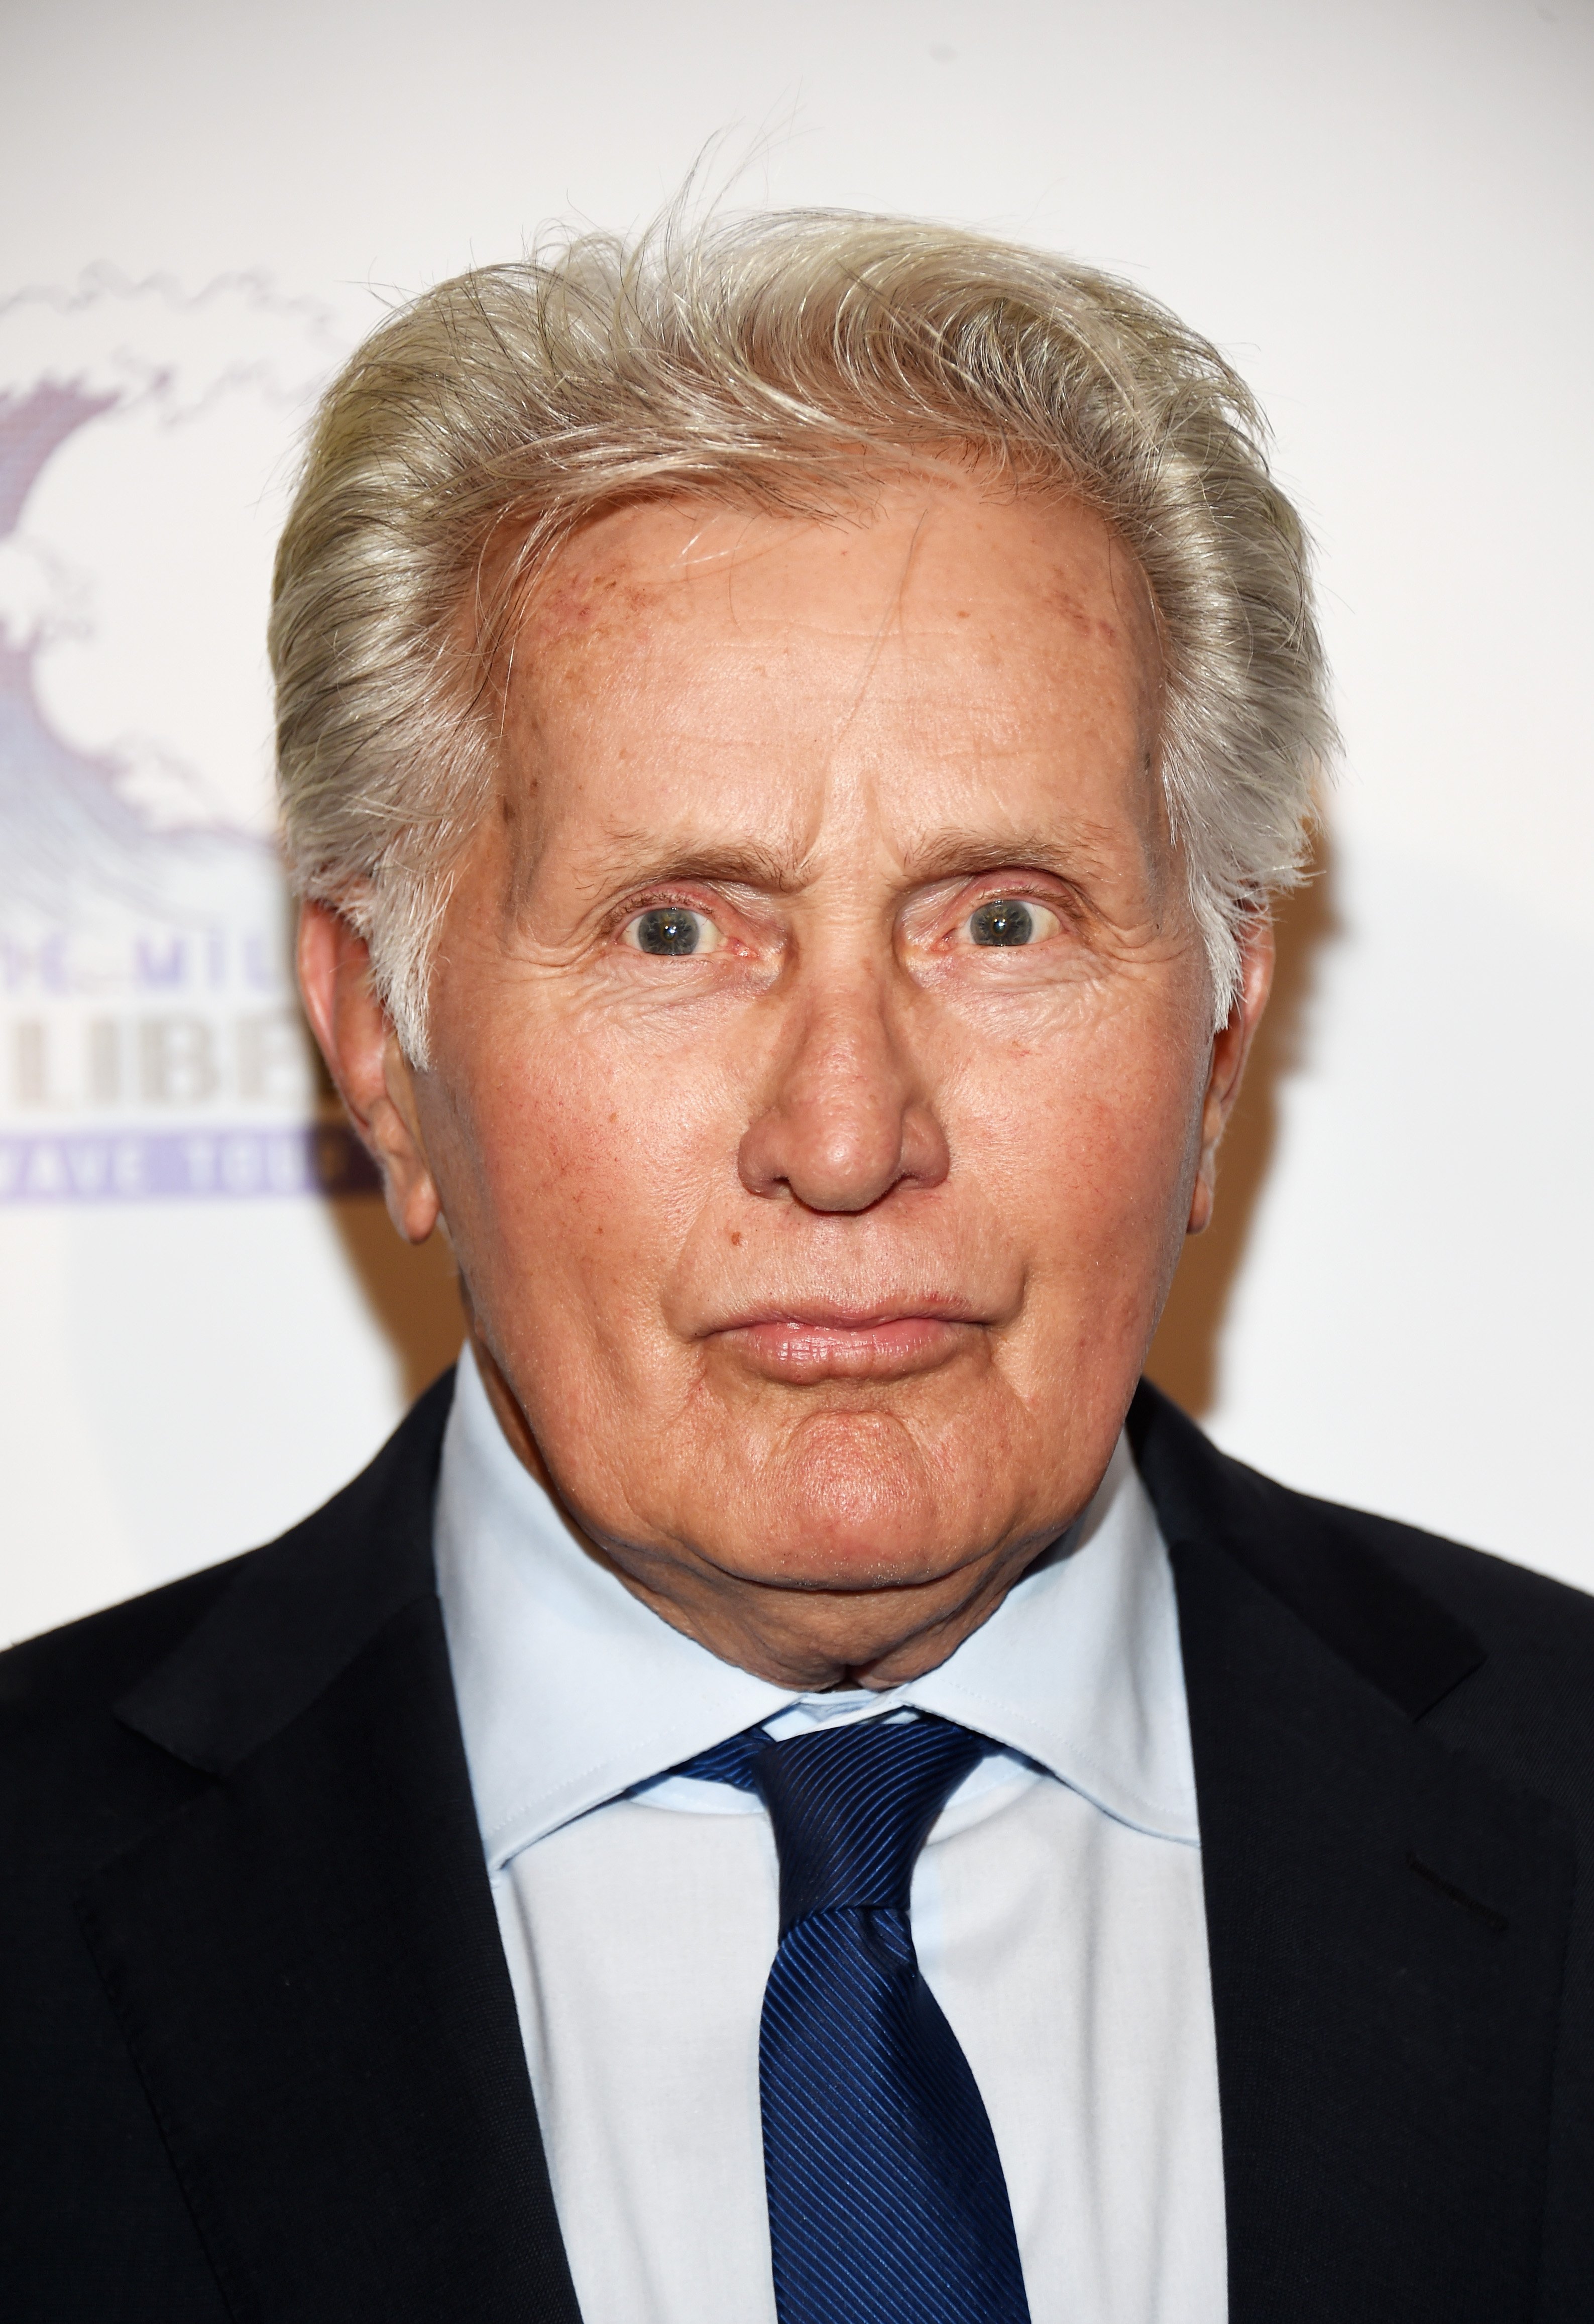 Martin Sheen attending the Los Angeles leg of Stephanie Miller's Sexy Liberal Blue Wave Tour at The Saban Theatre on November 3, 2018 in Beverly Hills, California. / Source: Getty Images